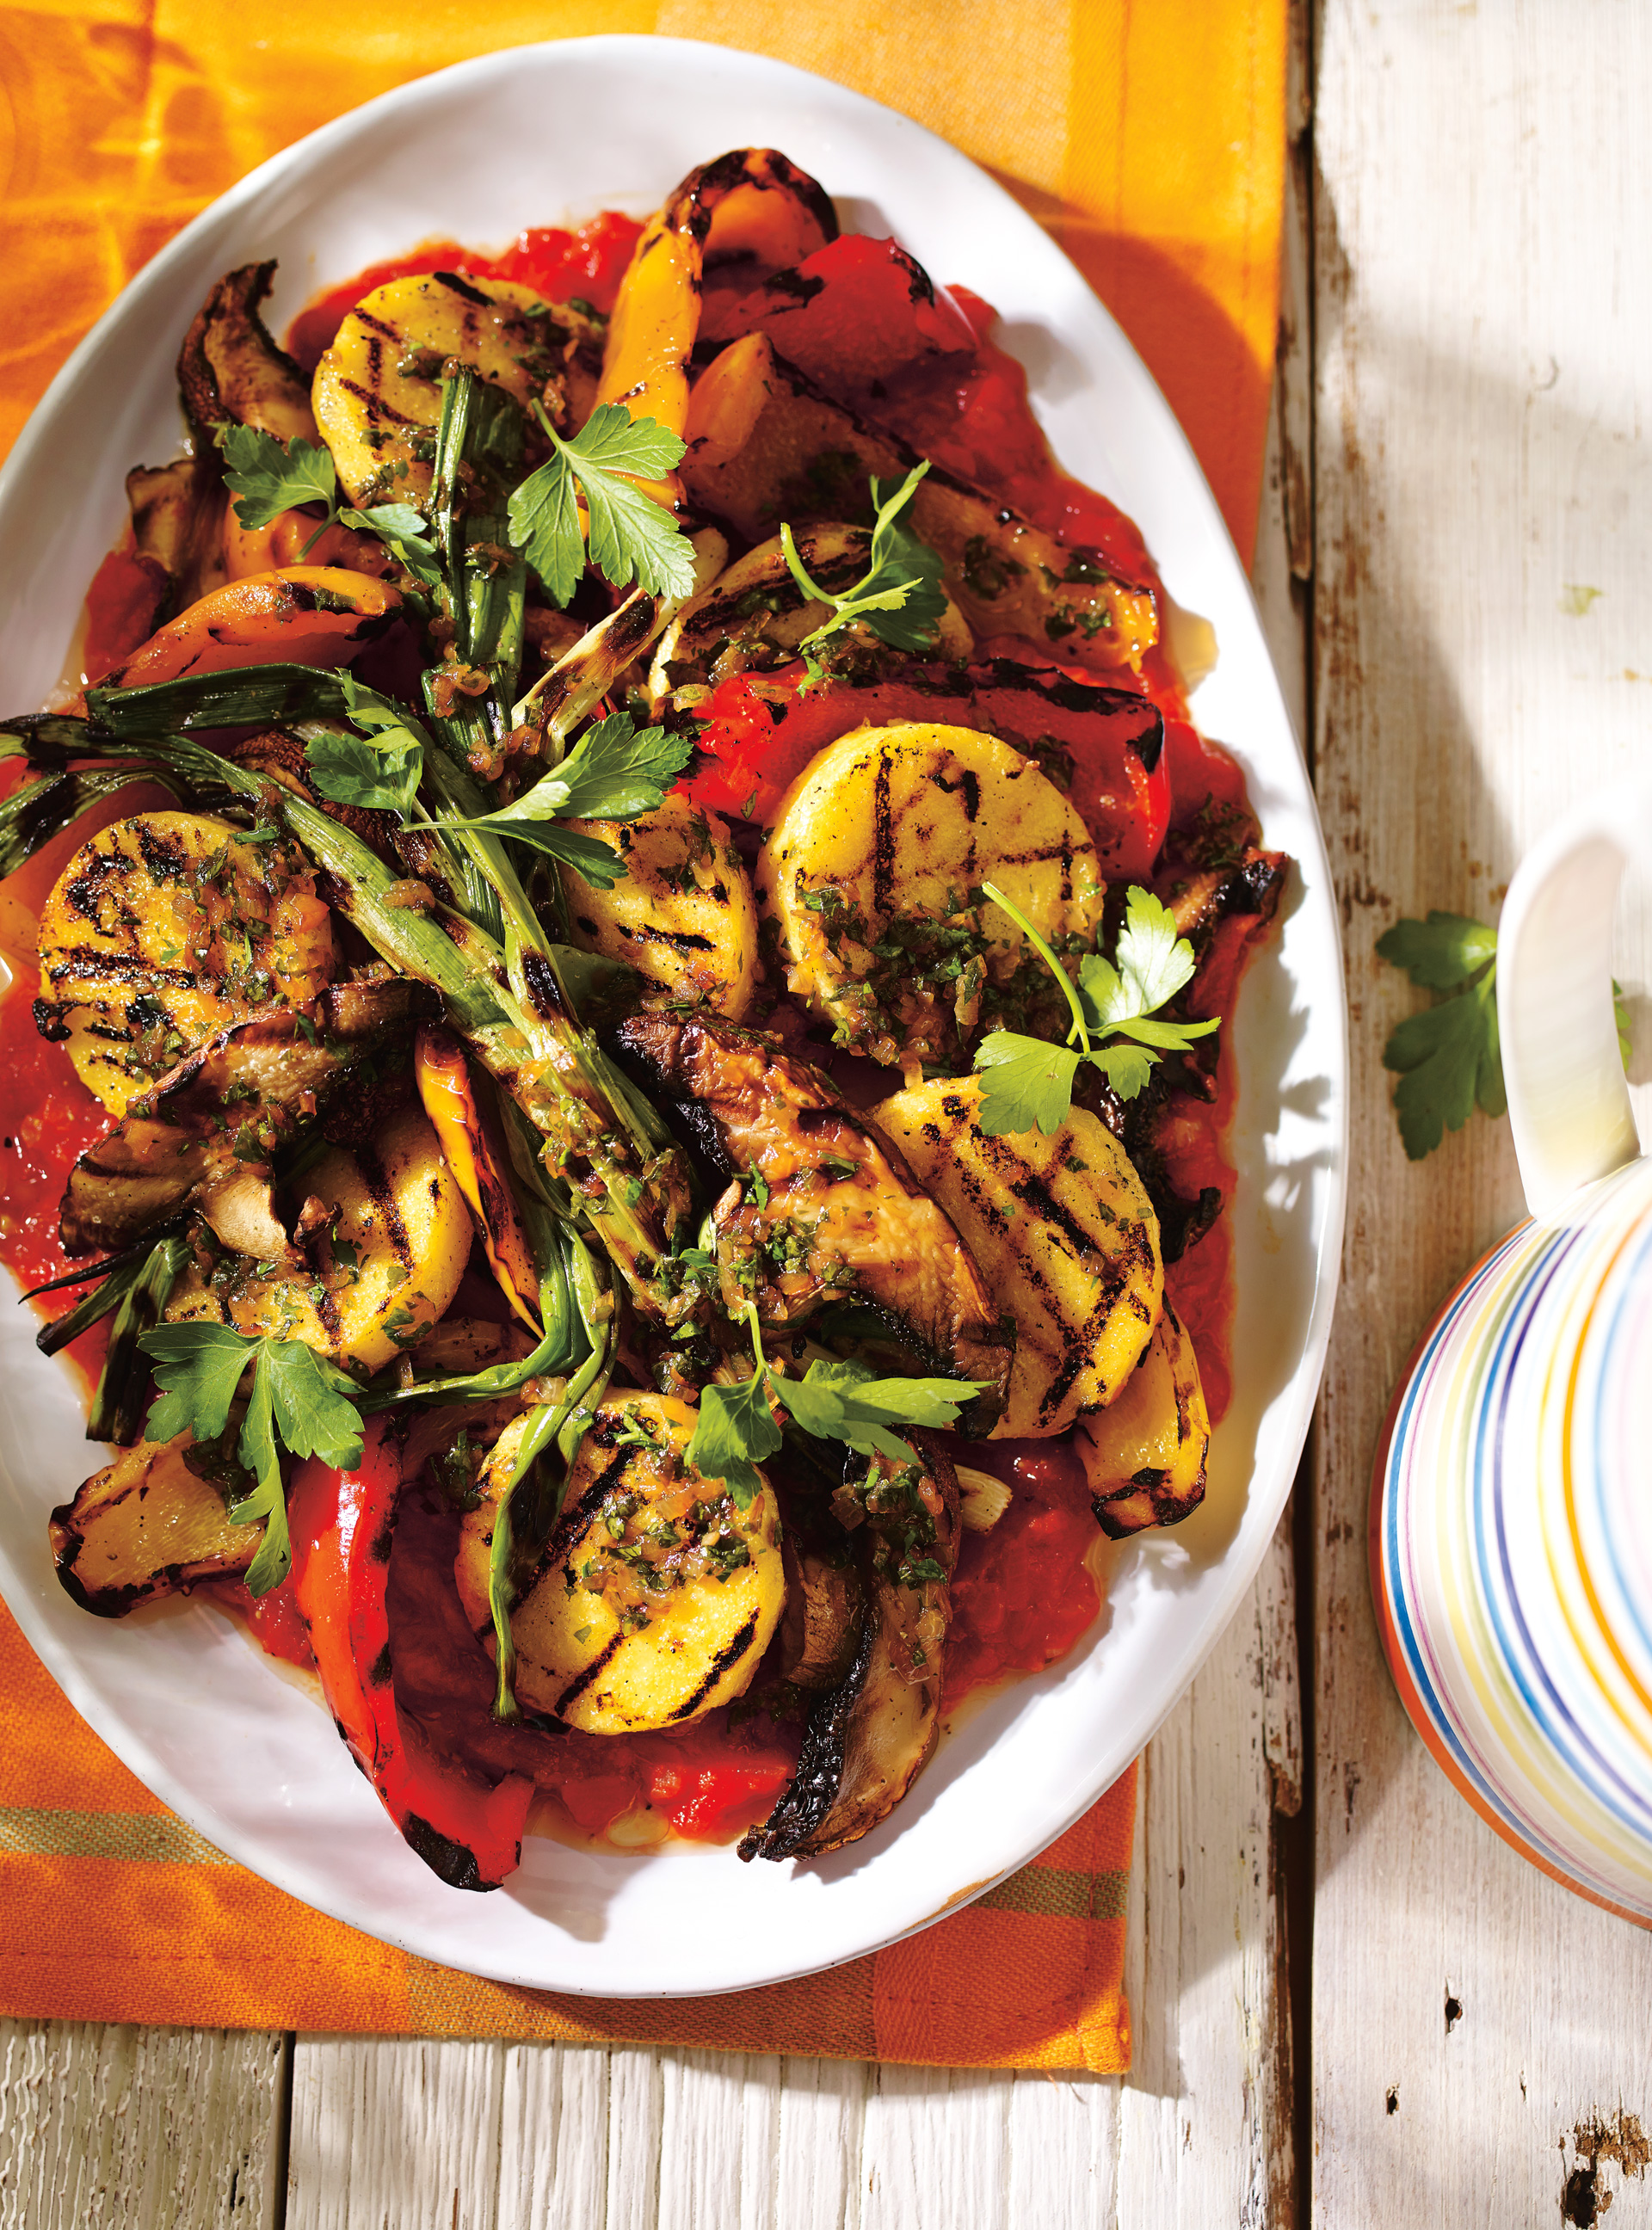 Grilled Polenta, Mushrooms and Peppers with Shallot Dressing